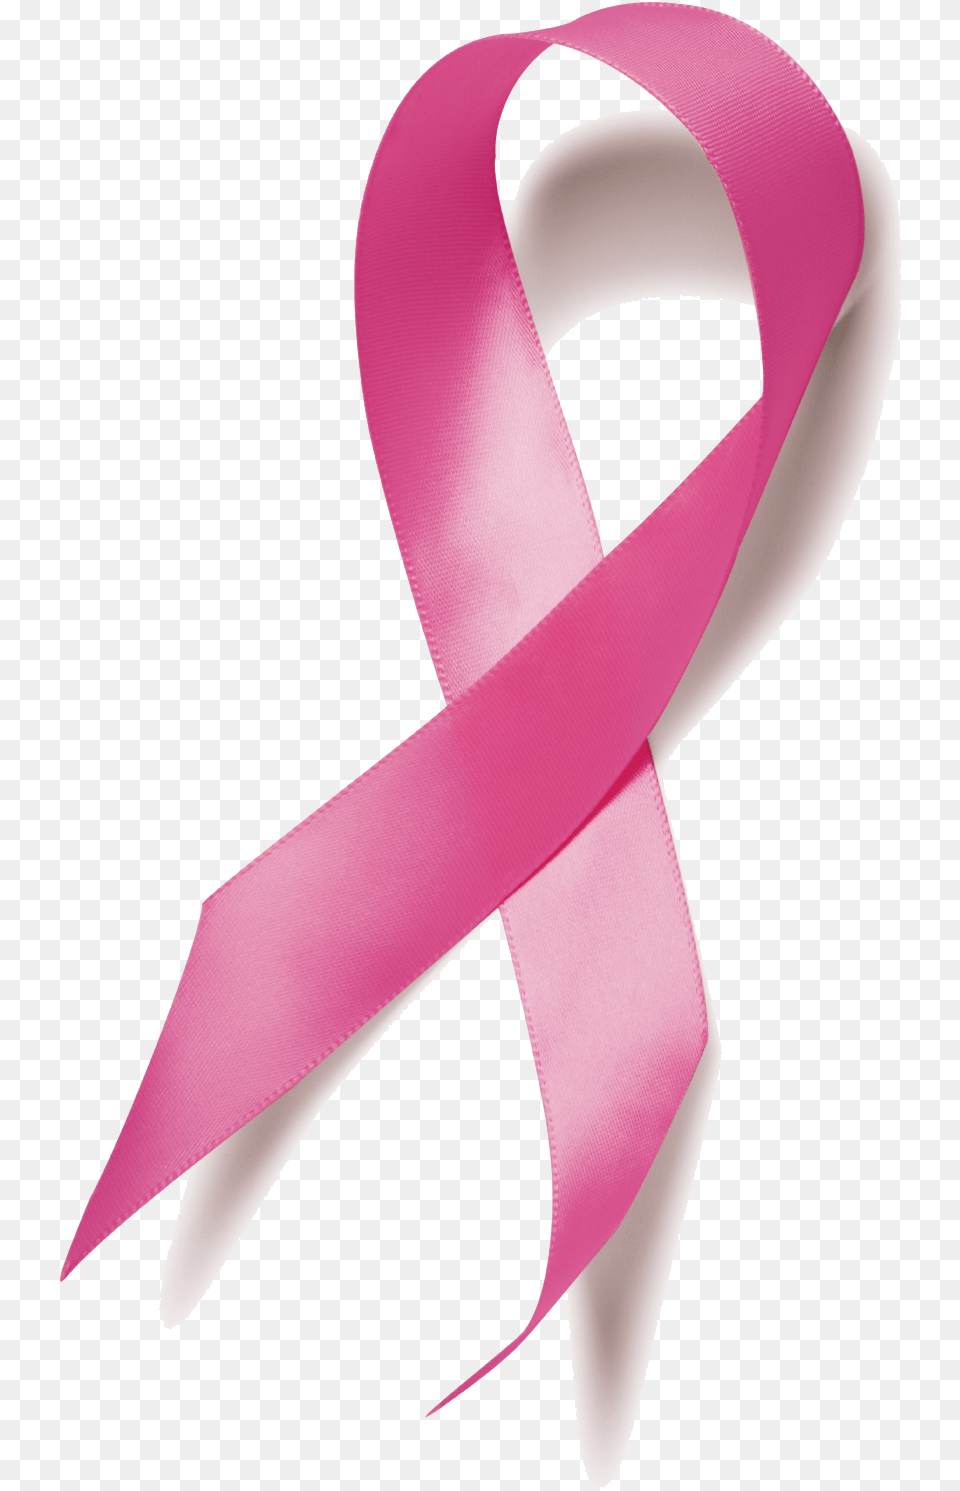 Download Breast Cancer Ribbon Breast Cancer Ribbon Realistic, Accessories, Formal Wear, Tie, Blade Free Transparent Png